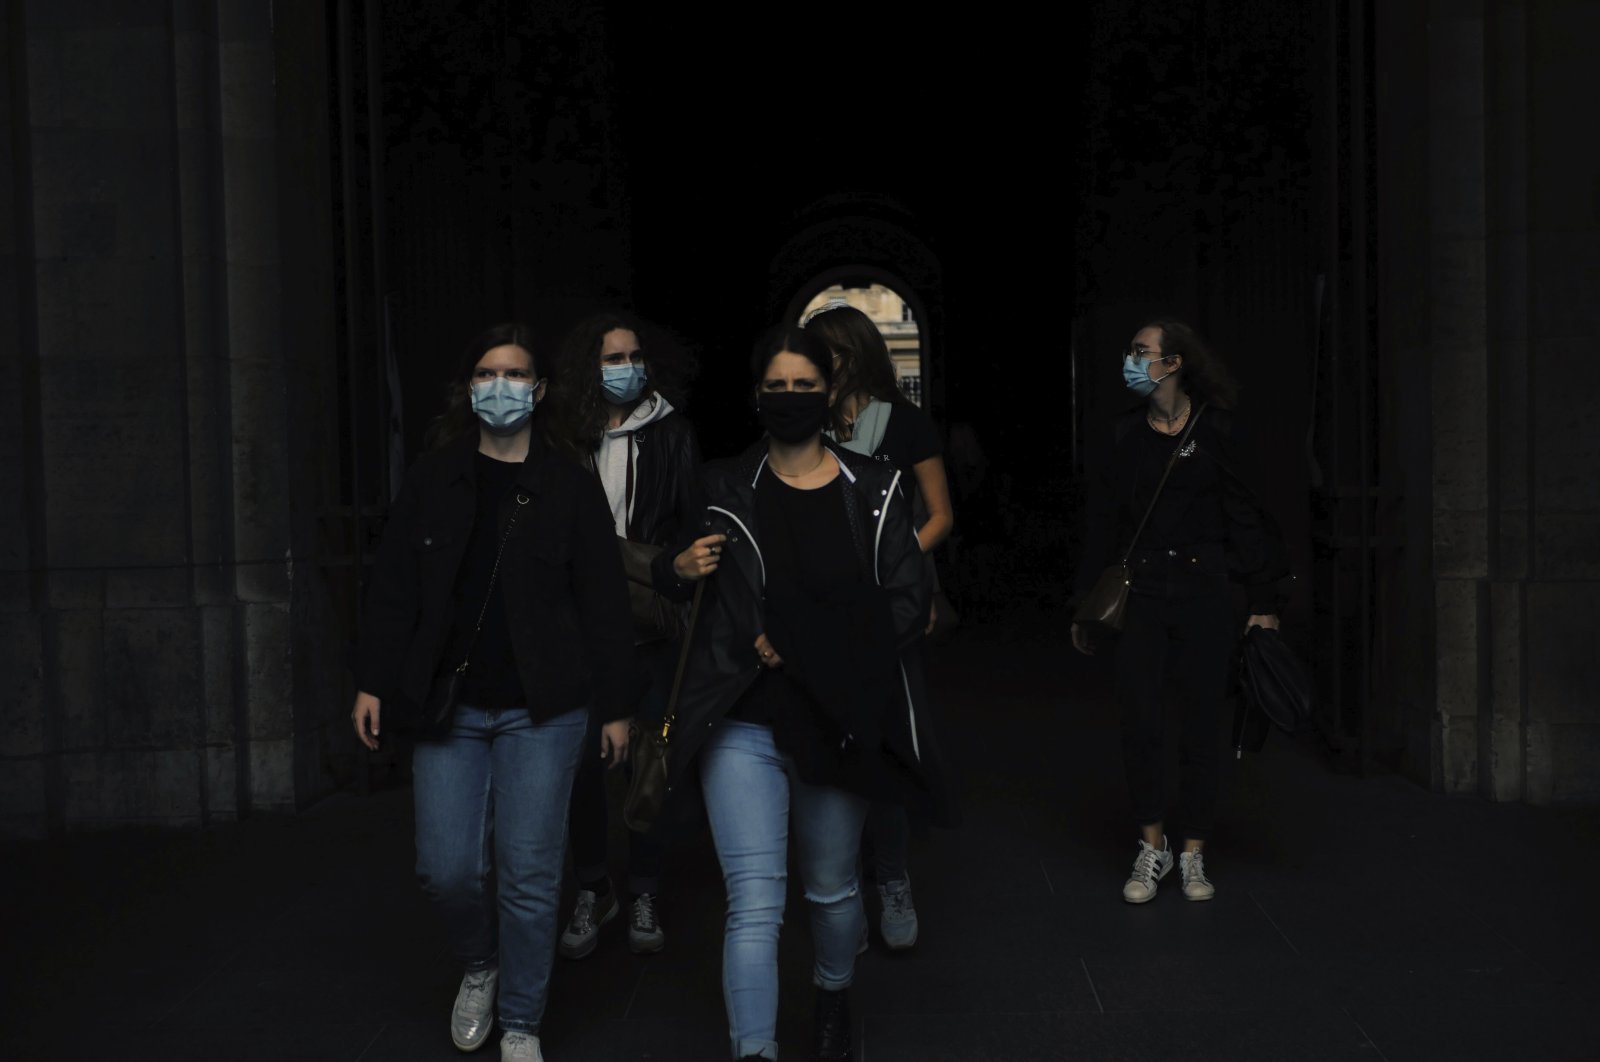 People wearing protective face mask as a precaution against the coronavirus walk in the courtyard of the Louvre museum, Paris, Oct. 1, 2020. (AP Photo)